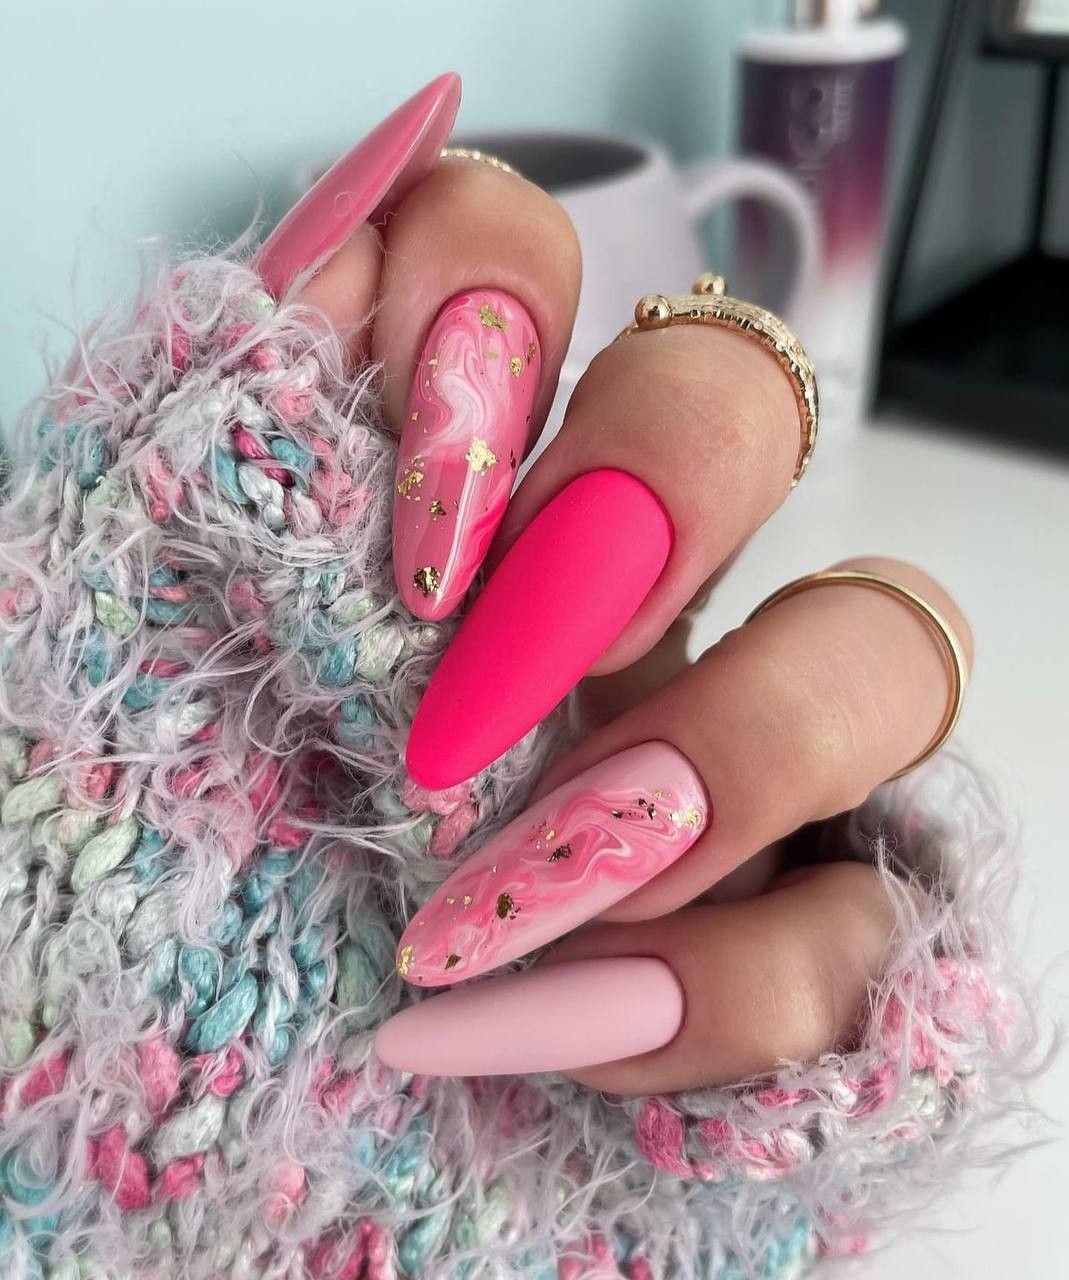 Summer 2023's Hottest Trends: New Nail Designs from Bright Acrylic Art to Unique Gel Stilettos